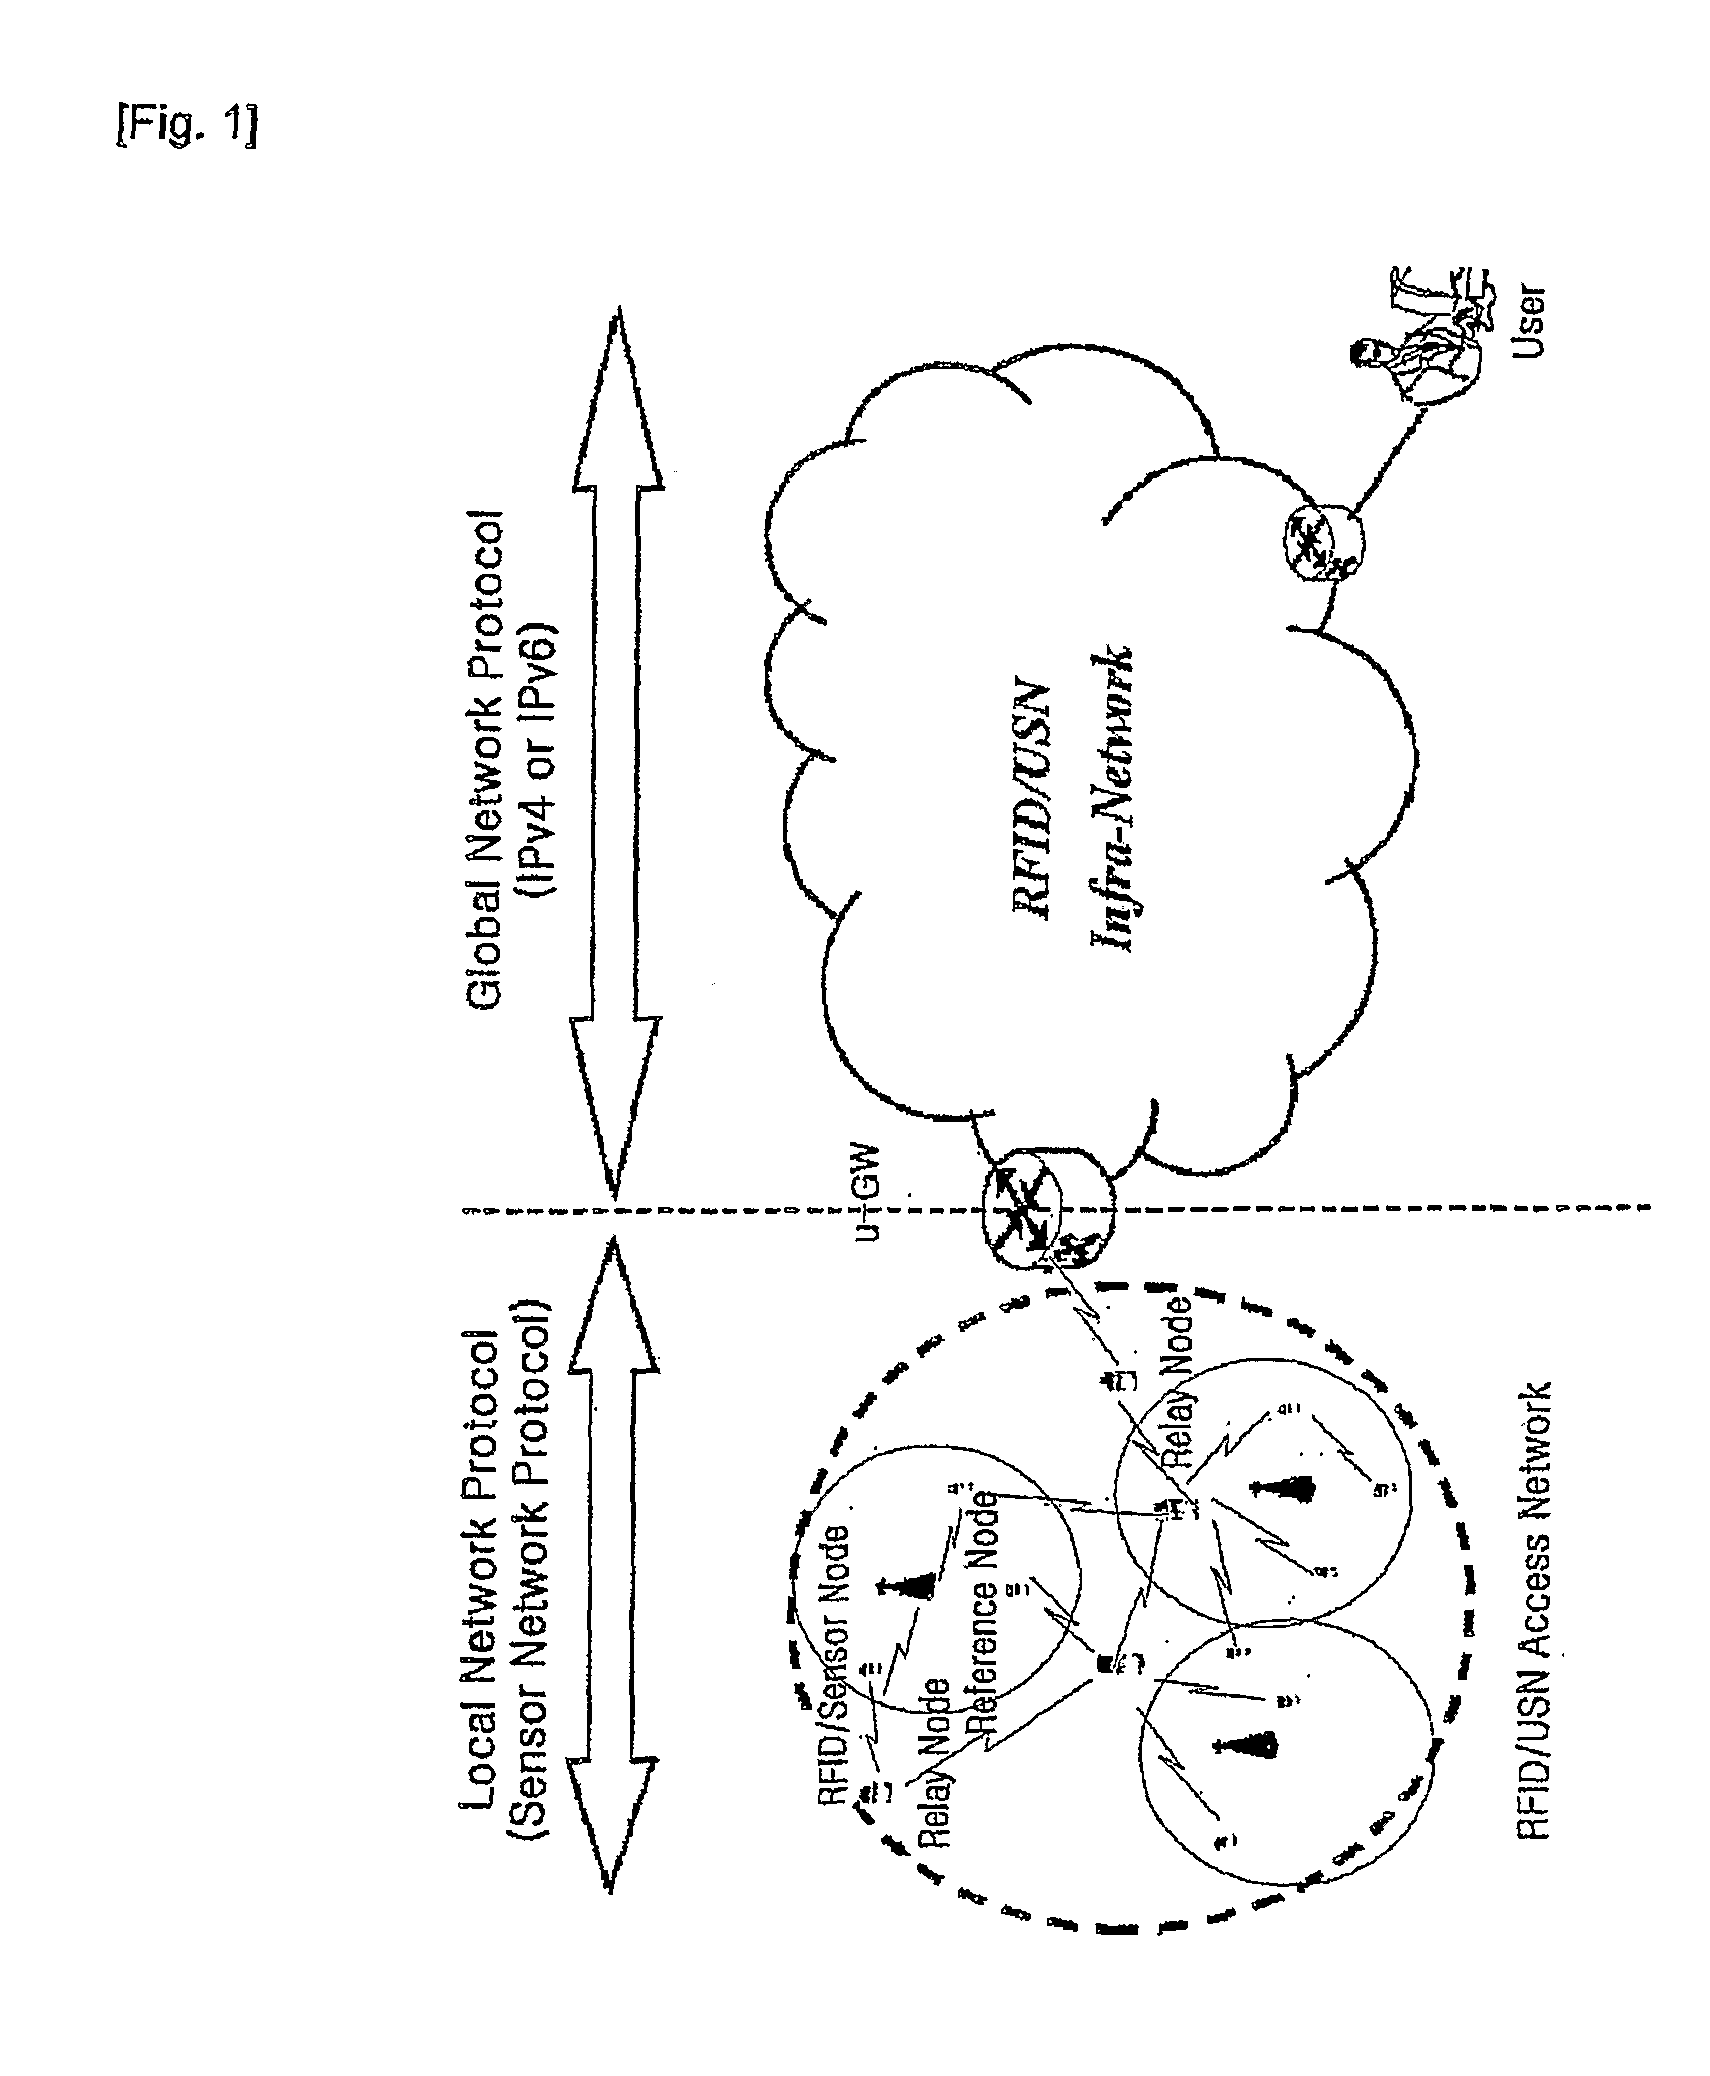 System and method for managing senor node in rfid/usn infrastructure and gateway system used therefor